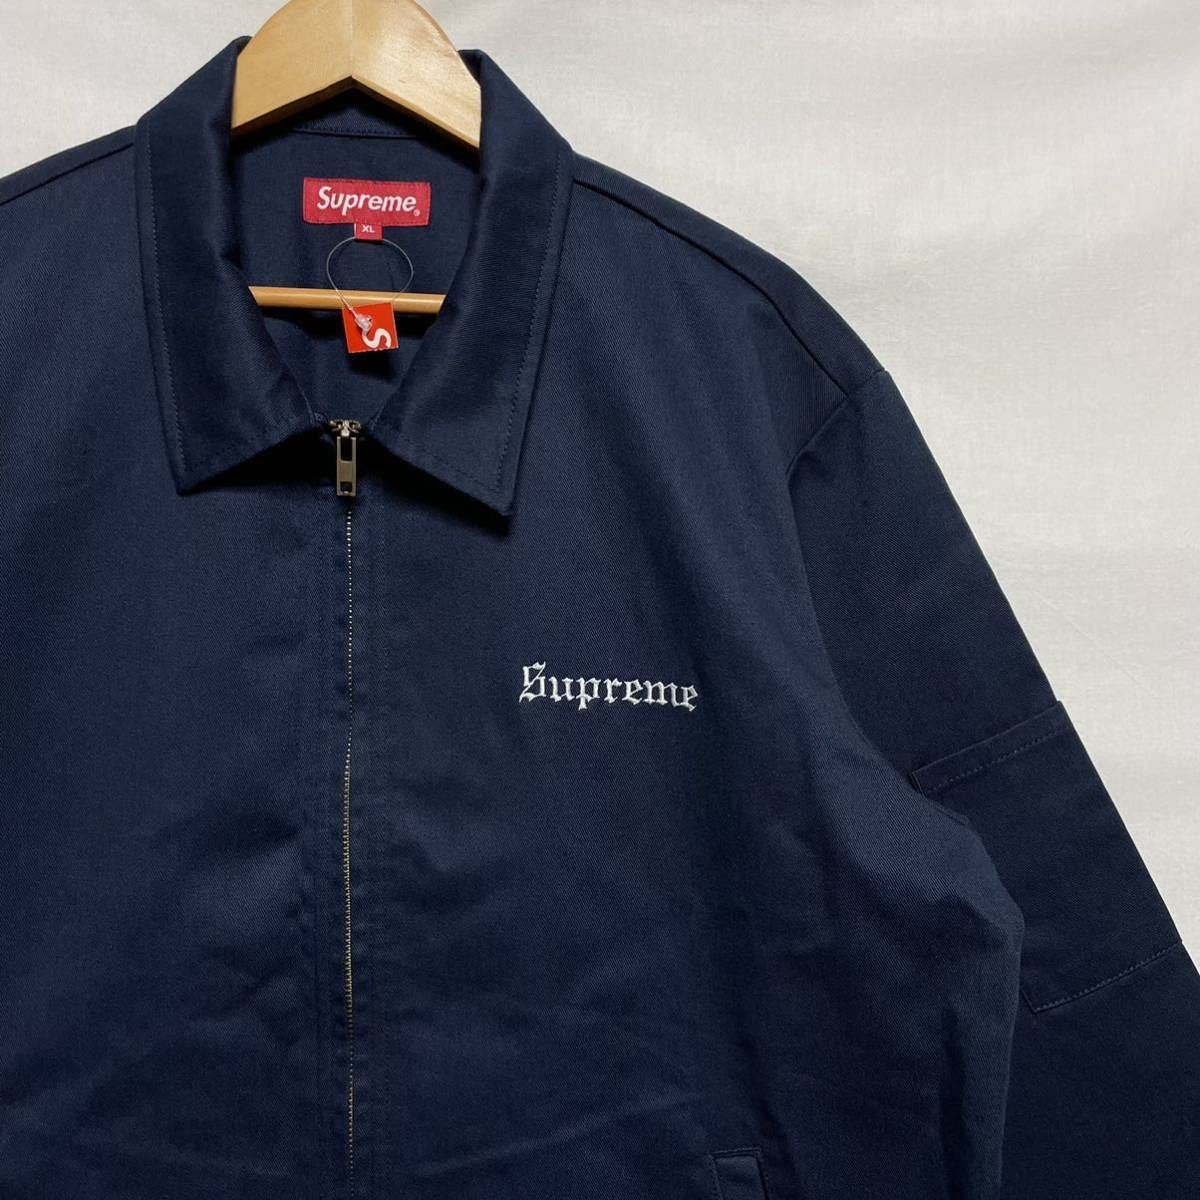 Supreme Dead Kennedys Work Jacket 14SS シュプリーム デッドケネディーズ ワークジャケット